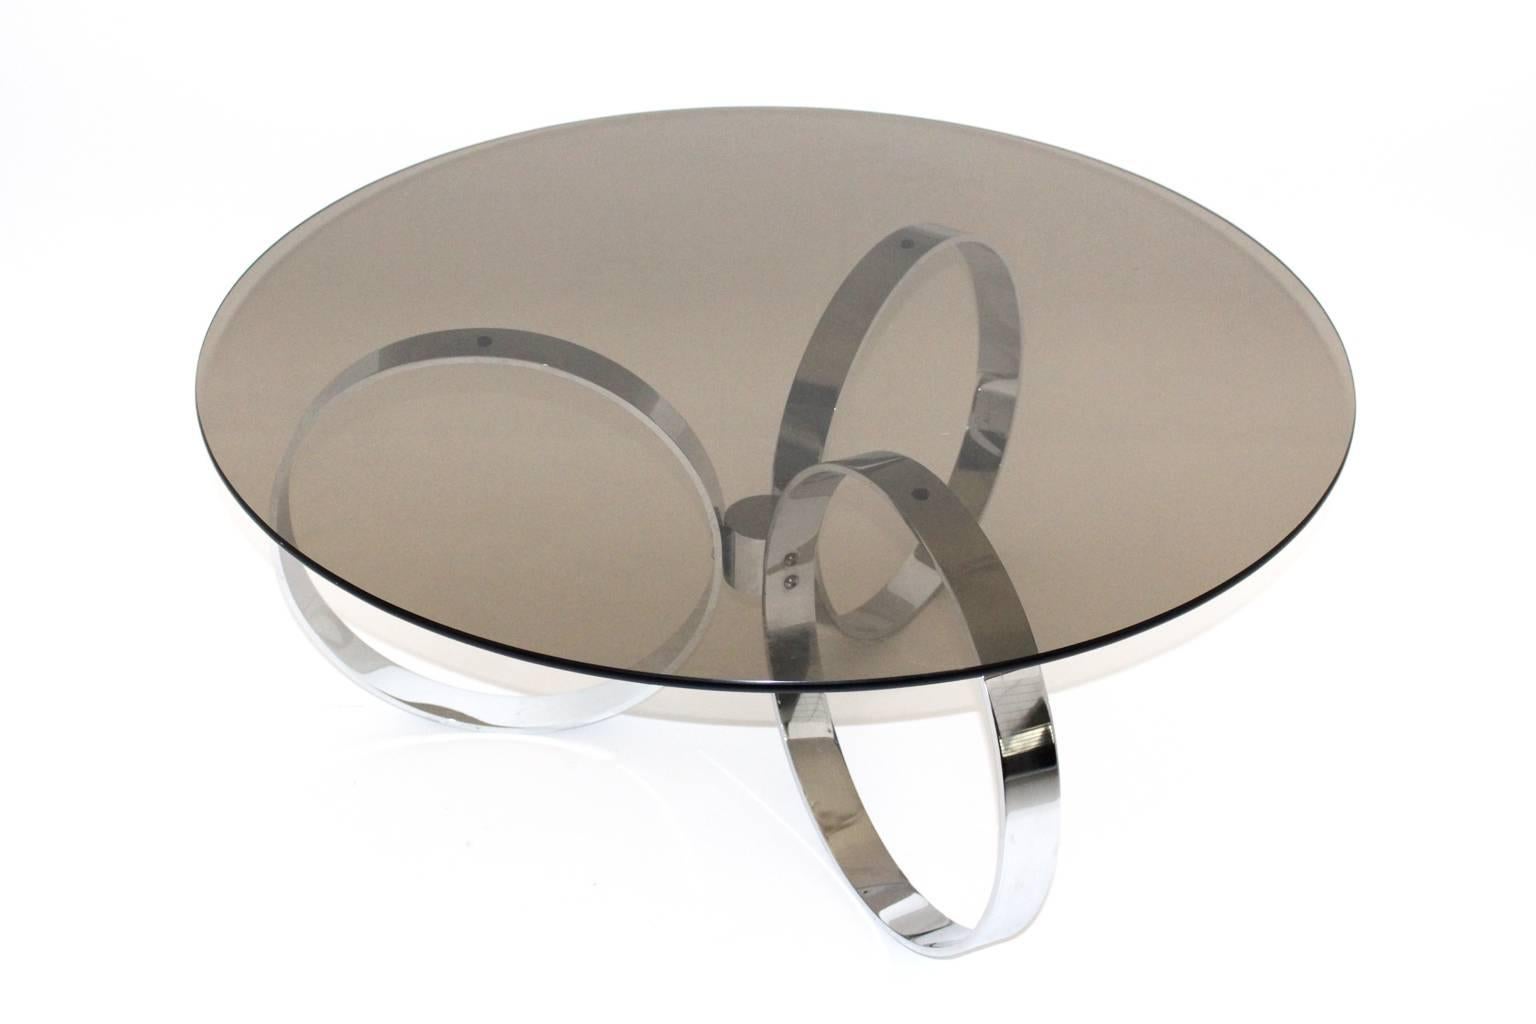 This coffee table has a base with three solid metal chromed rings. Also the top features a smoked clear glass plate.

The measures are:
Table base diameter 70 cm, height: 41 cm
Table with the glass top diameter 99 cm, height 42 cm.
all measures are